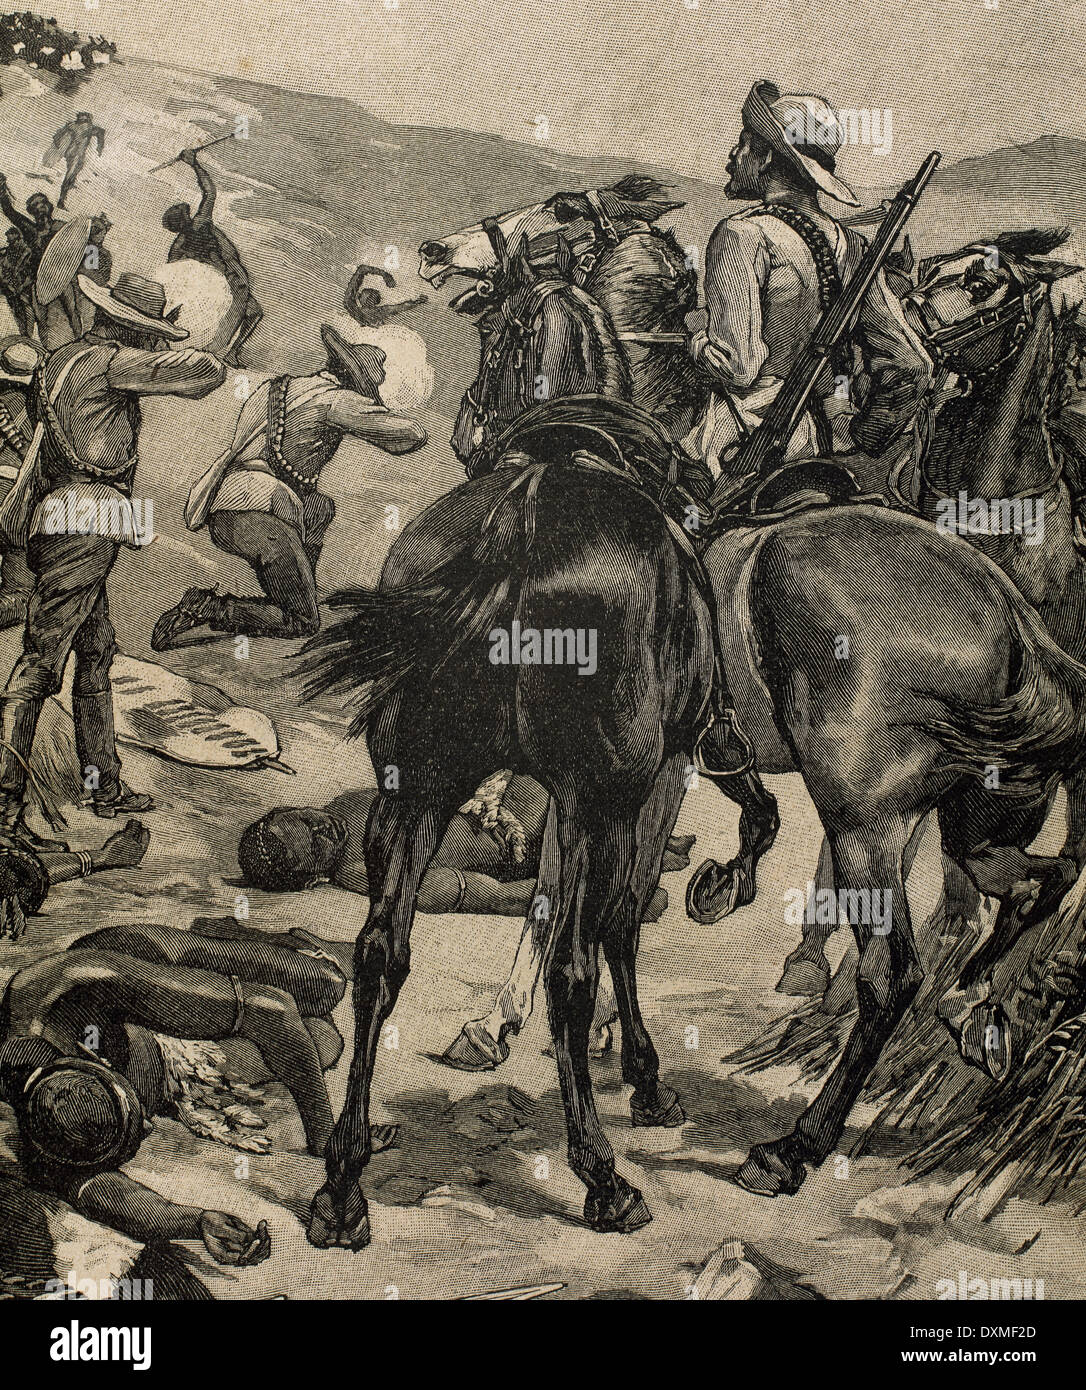 Anglo-Zulu War. Fought in 1879 between the British Empire and the Zulu Kingdom. Engraving by Marguerite. Stock Photo